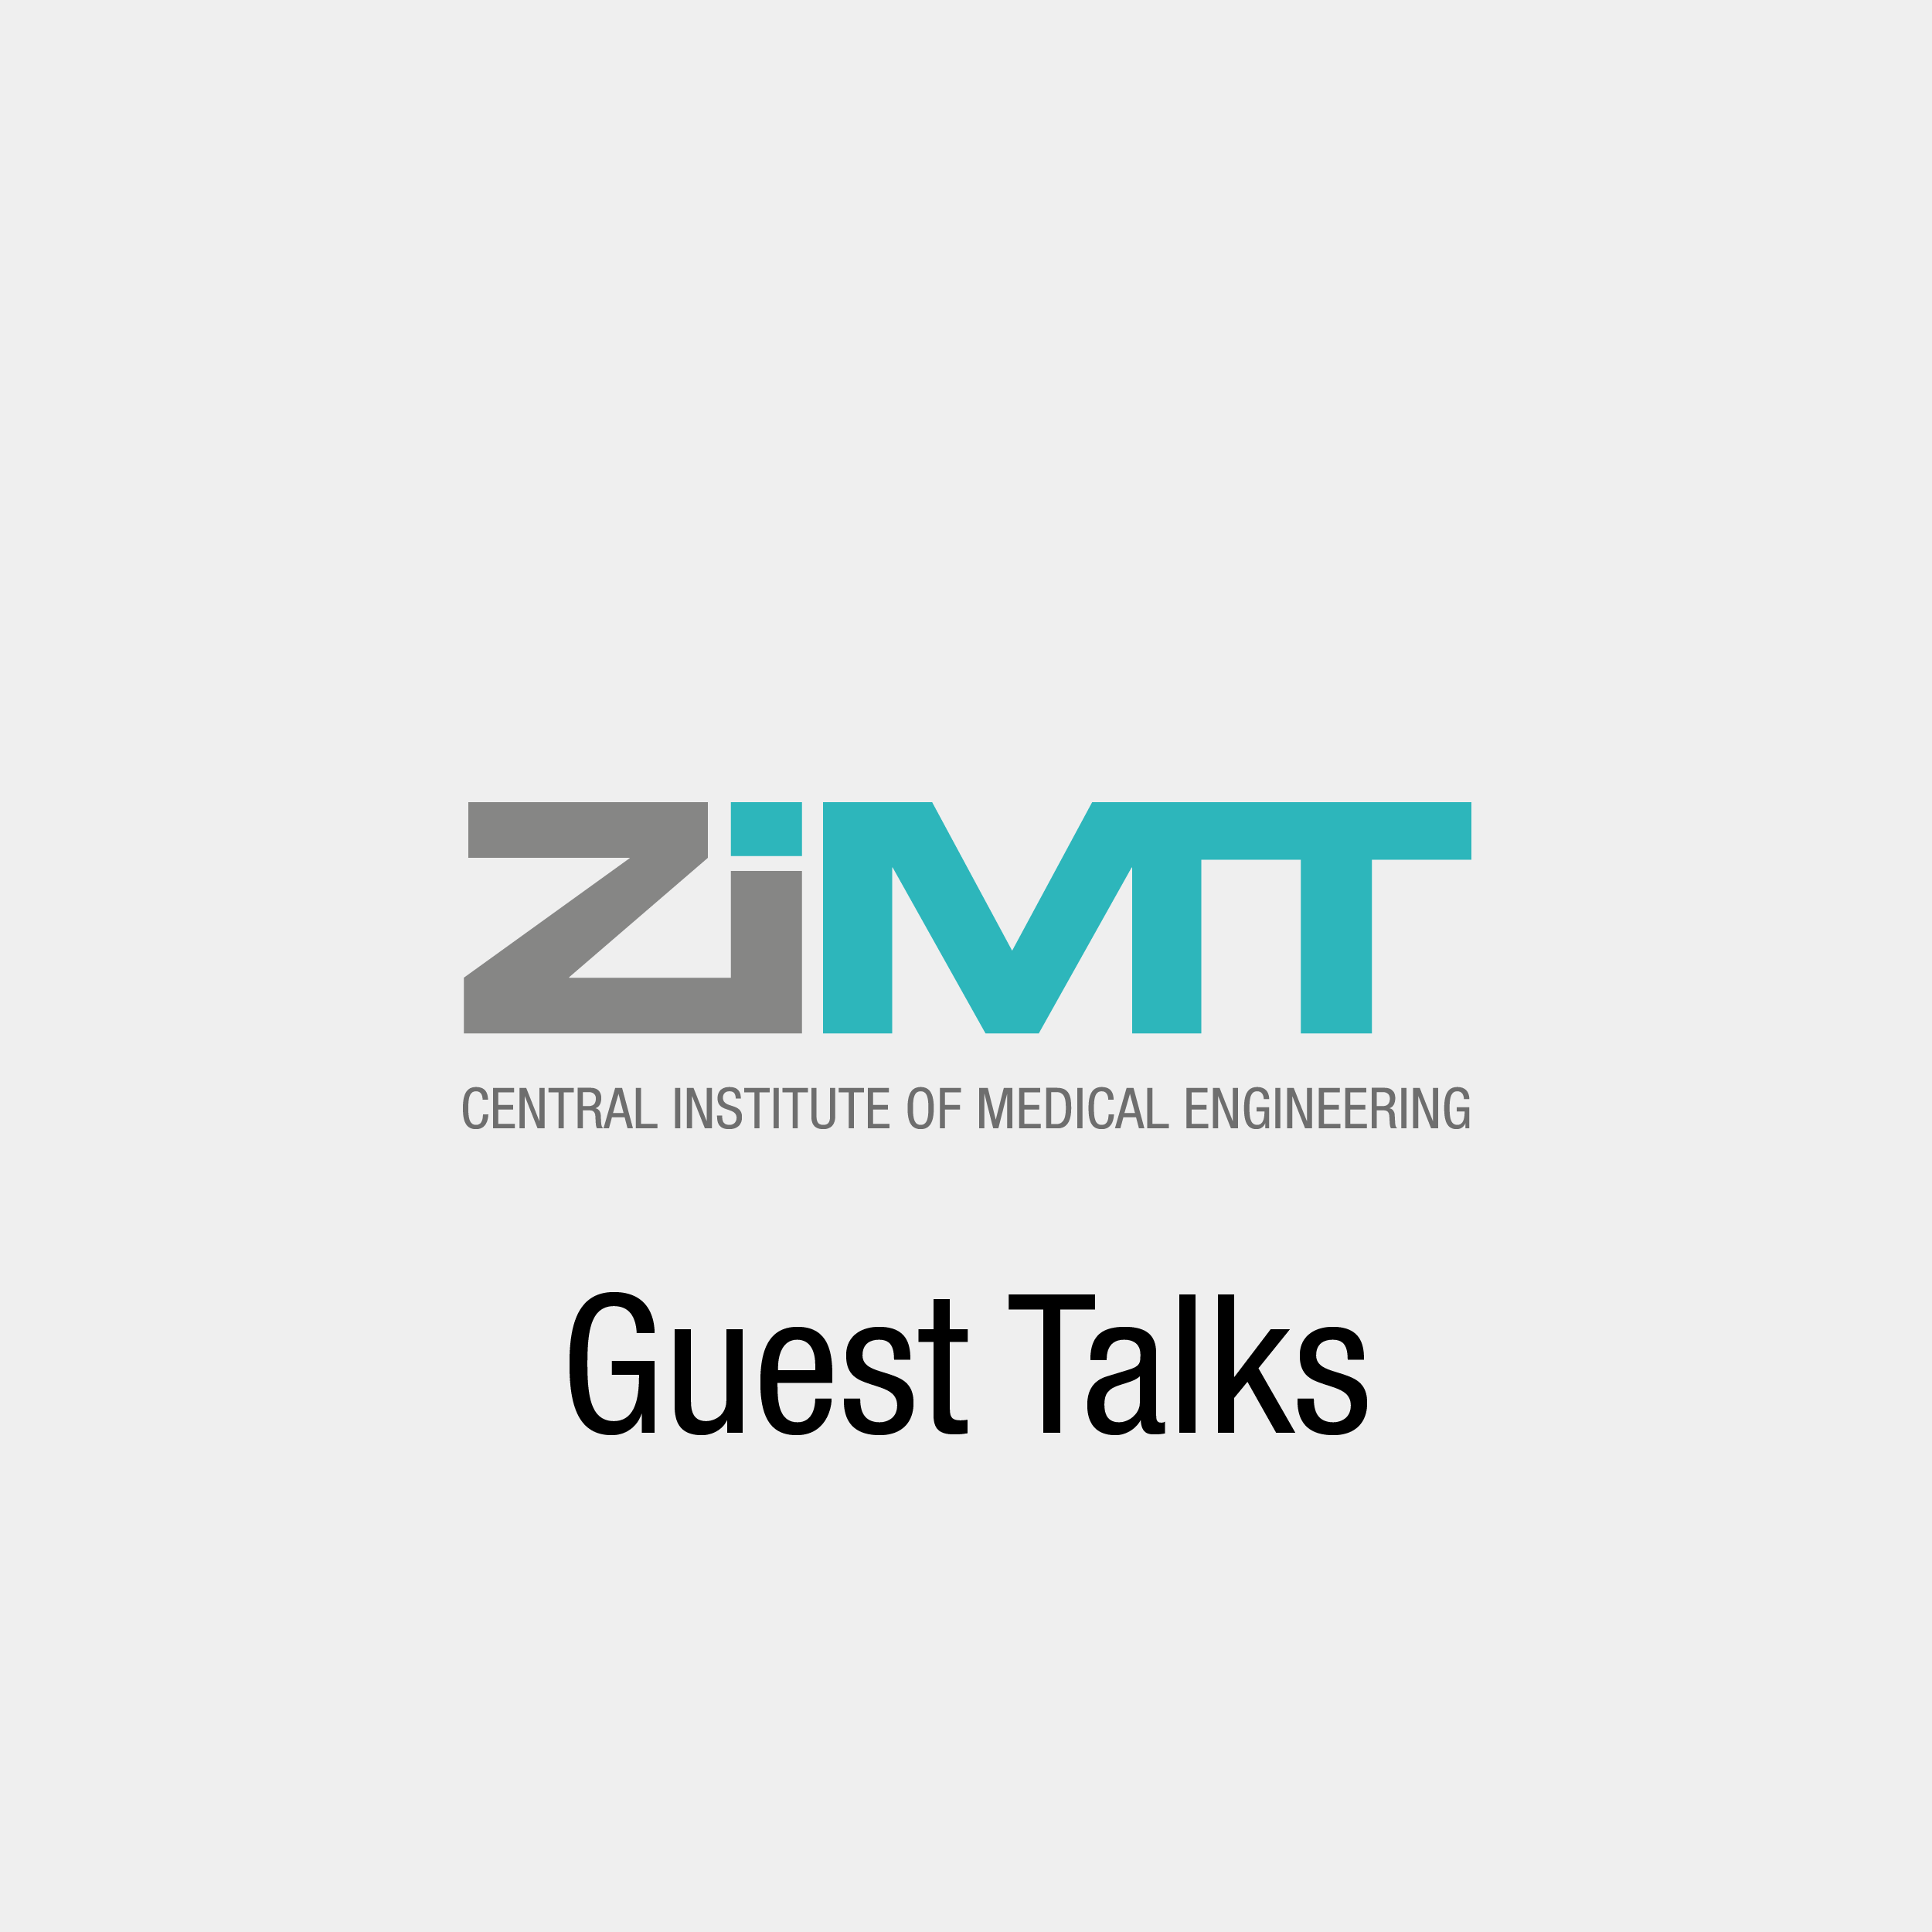 Guest Talk at the ZiMT